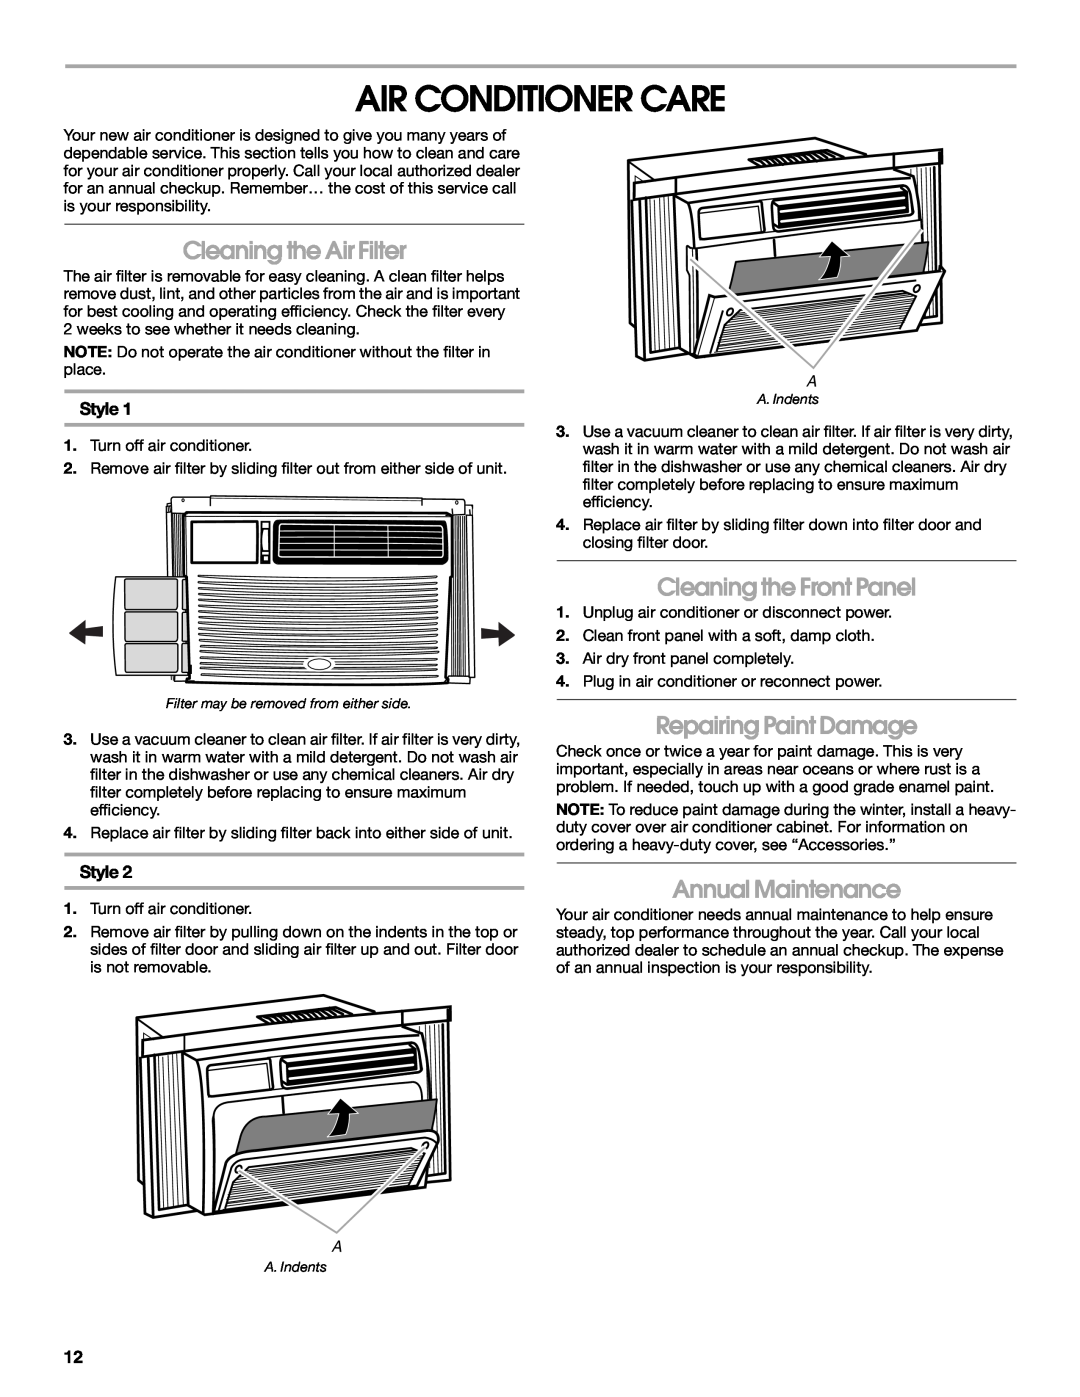 Whirlpool ACM052PS0 Air Conditioner Care, Cleaning the Air Filter, Cleaning the Front Panel, Repairing Paint Damage, Style 